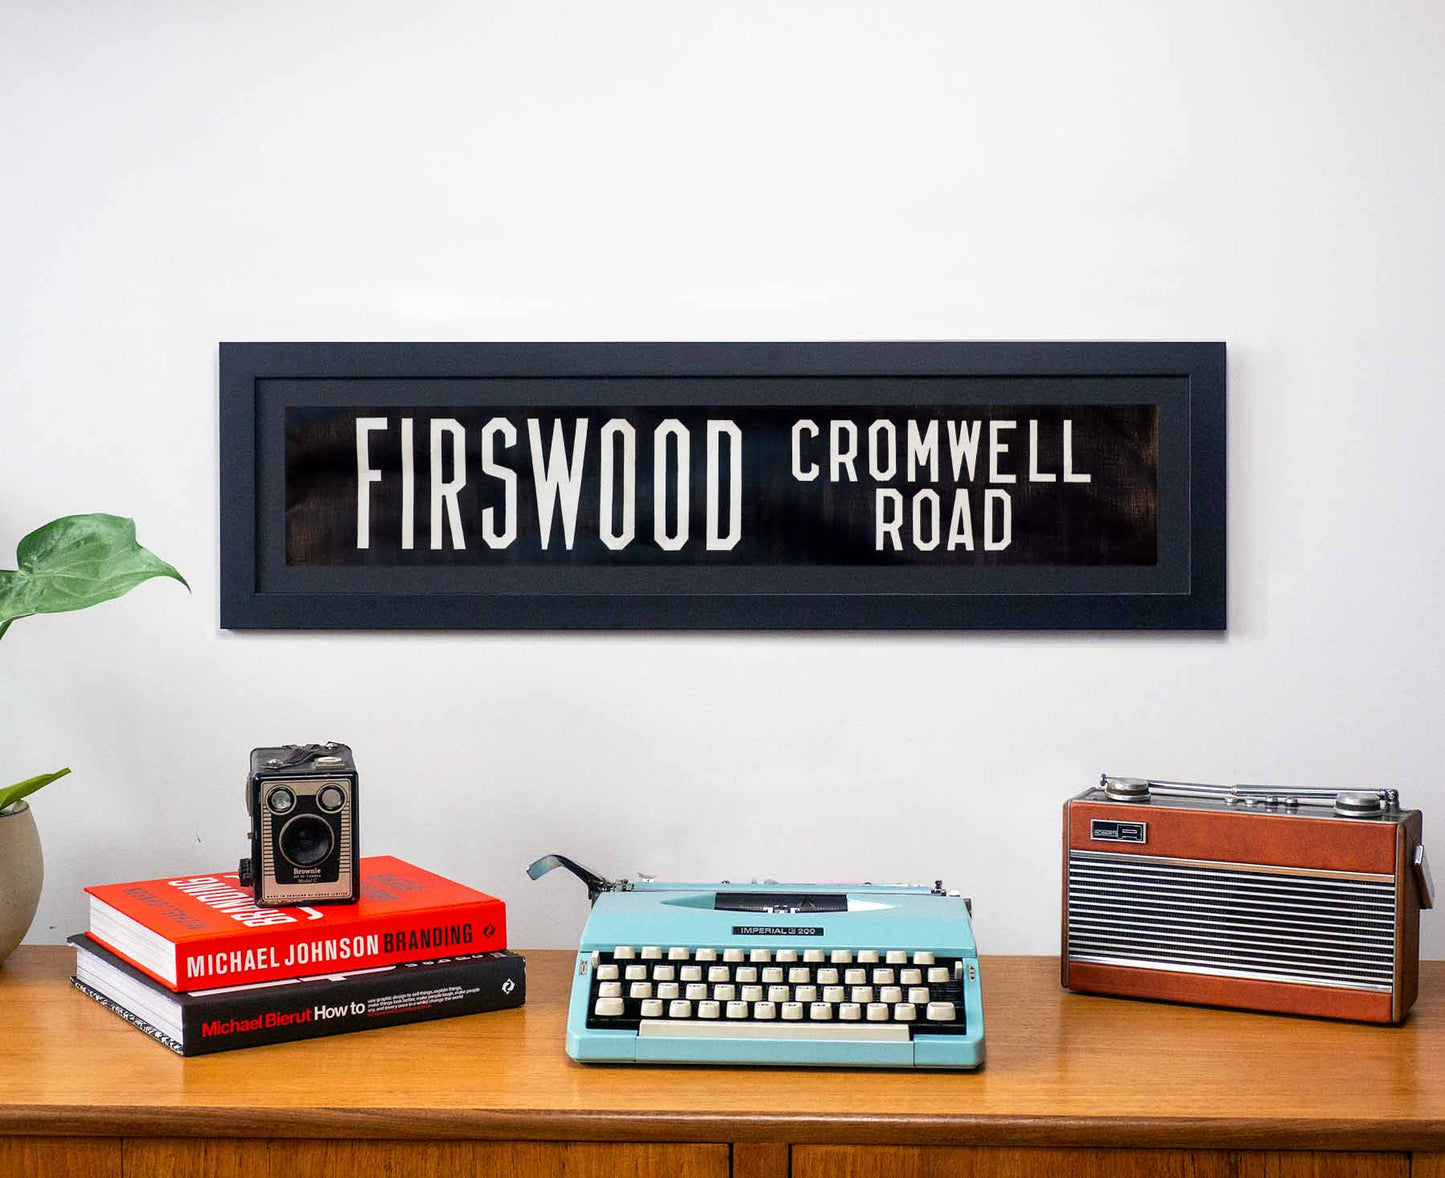 Firswood Cromwell Road 1960s Framed Bus Blind